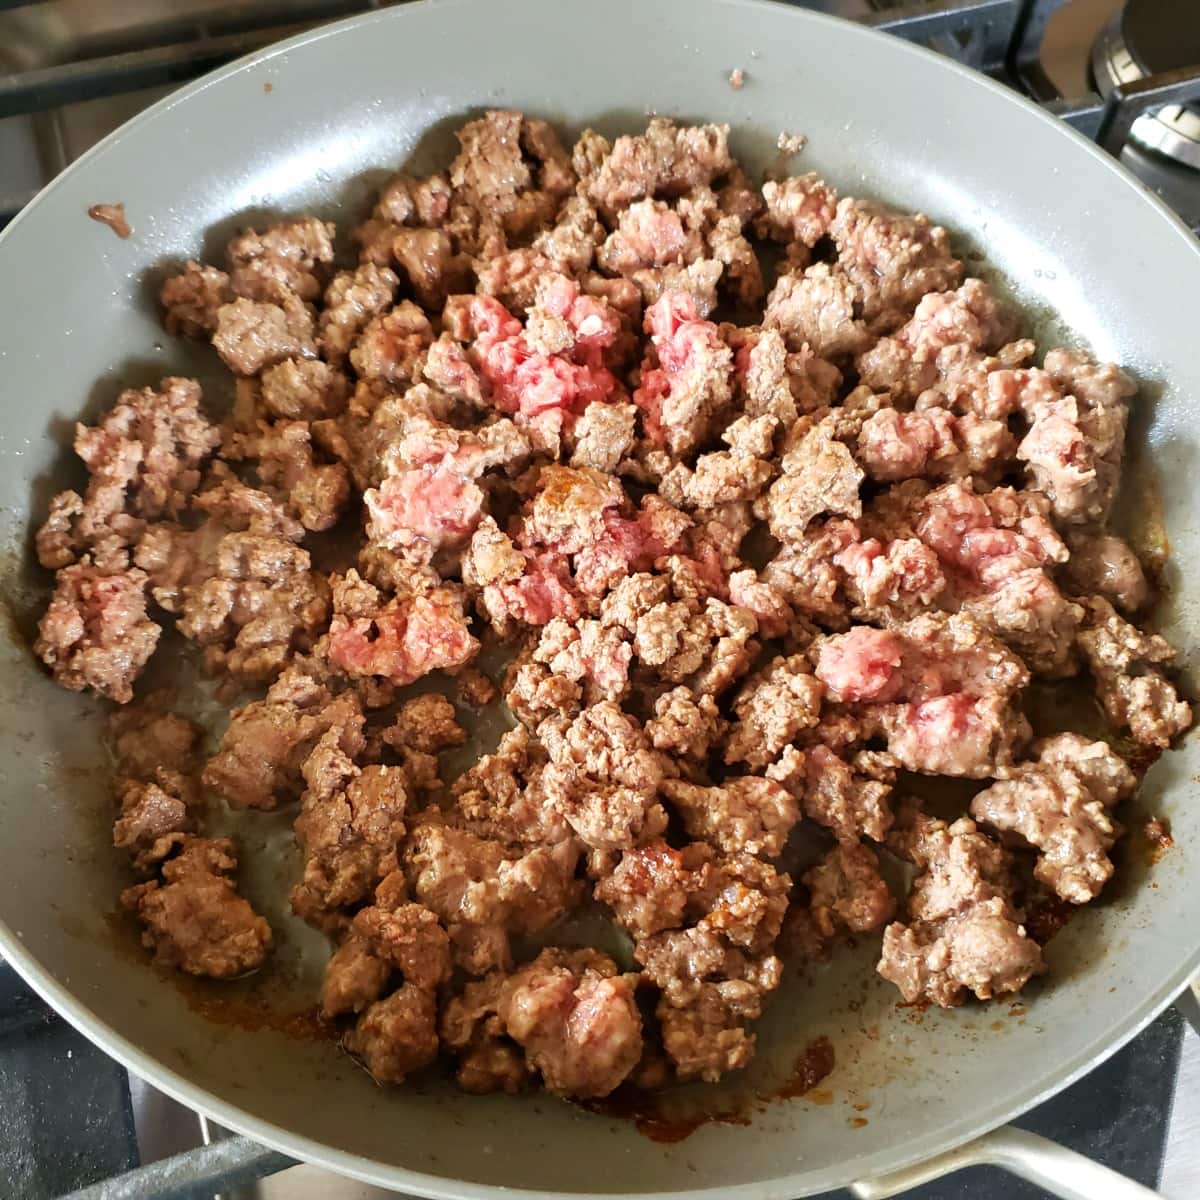 Ground beef cooking in a gray skillet